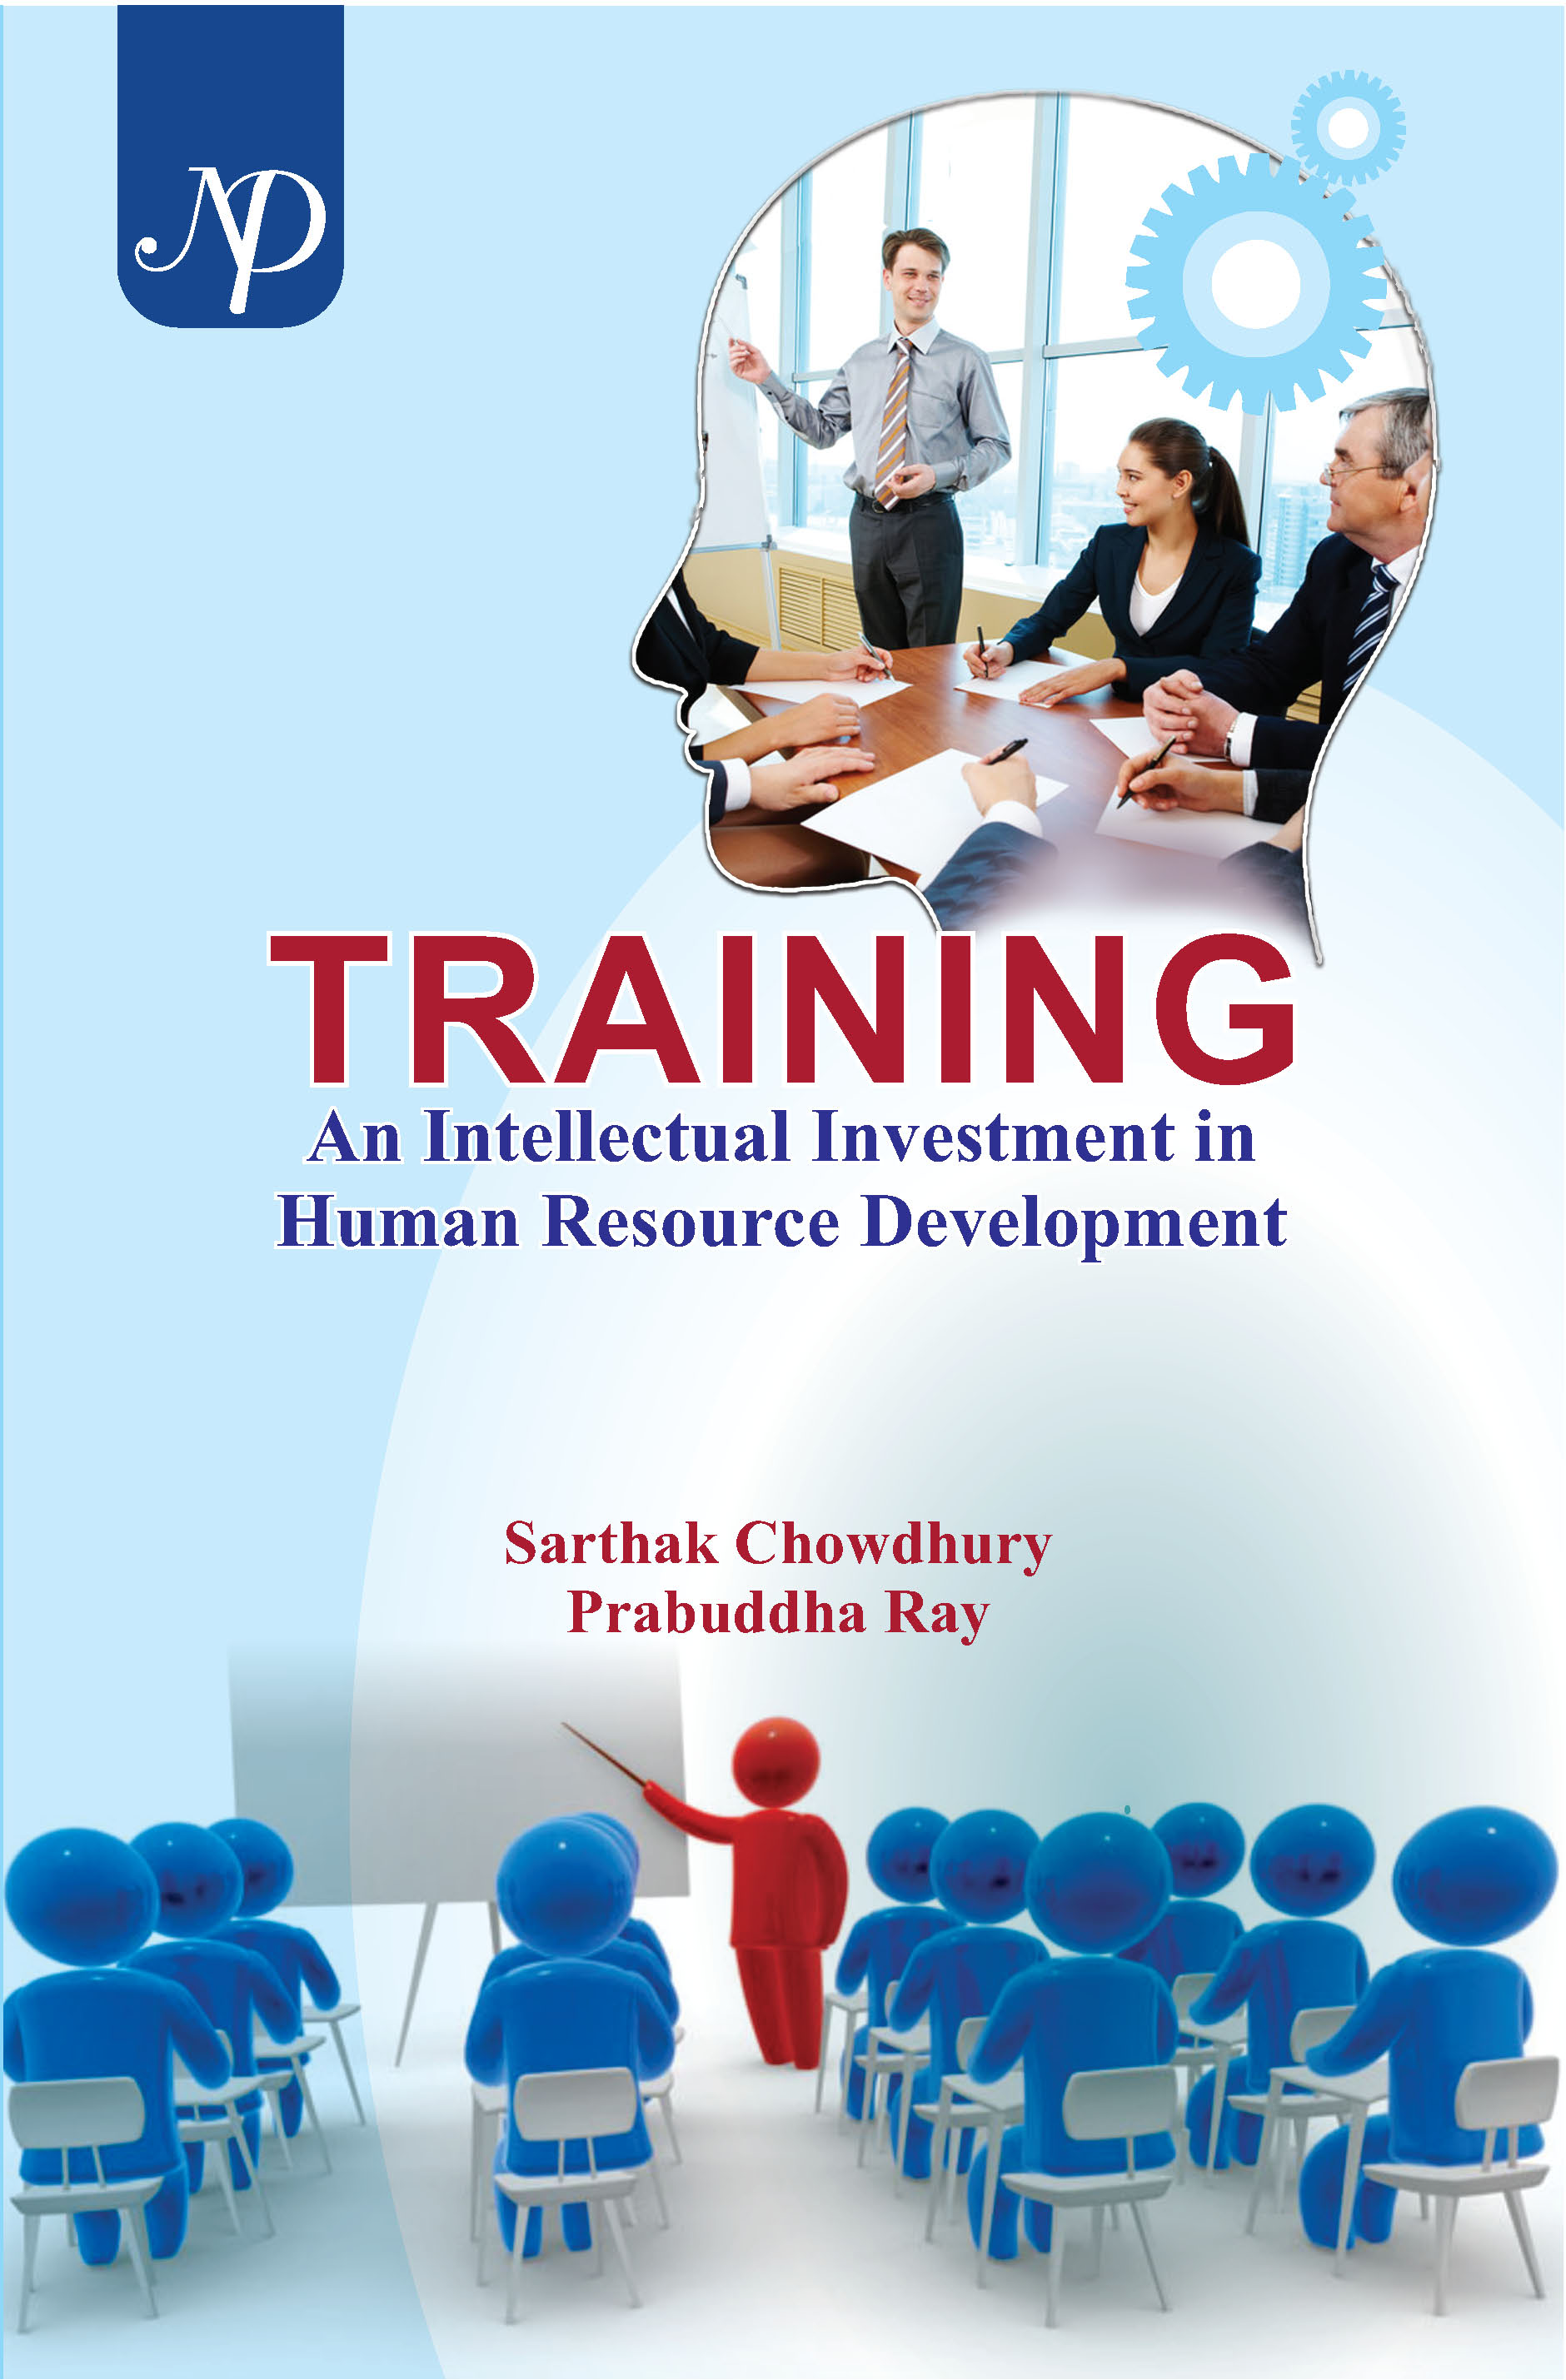 Training An Intellectual Investment in  Human Resources Development.jpg